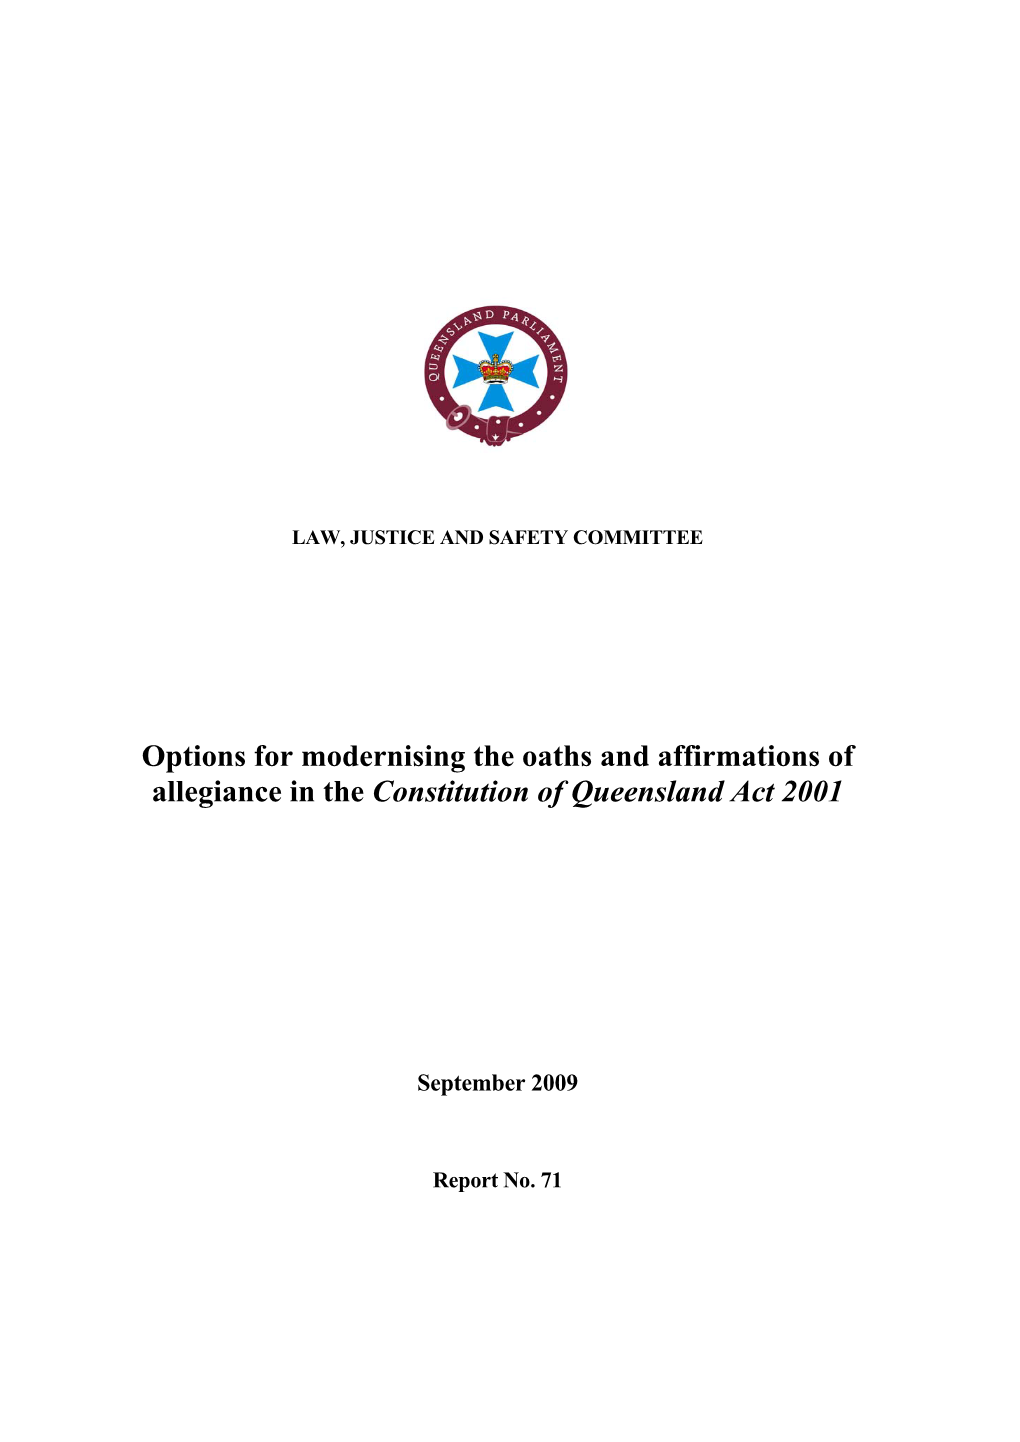 Options for Modernising the Oaths and Affirmations of Allegiance in the Constitution of Queensland Act 2001